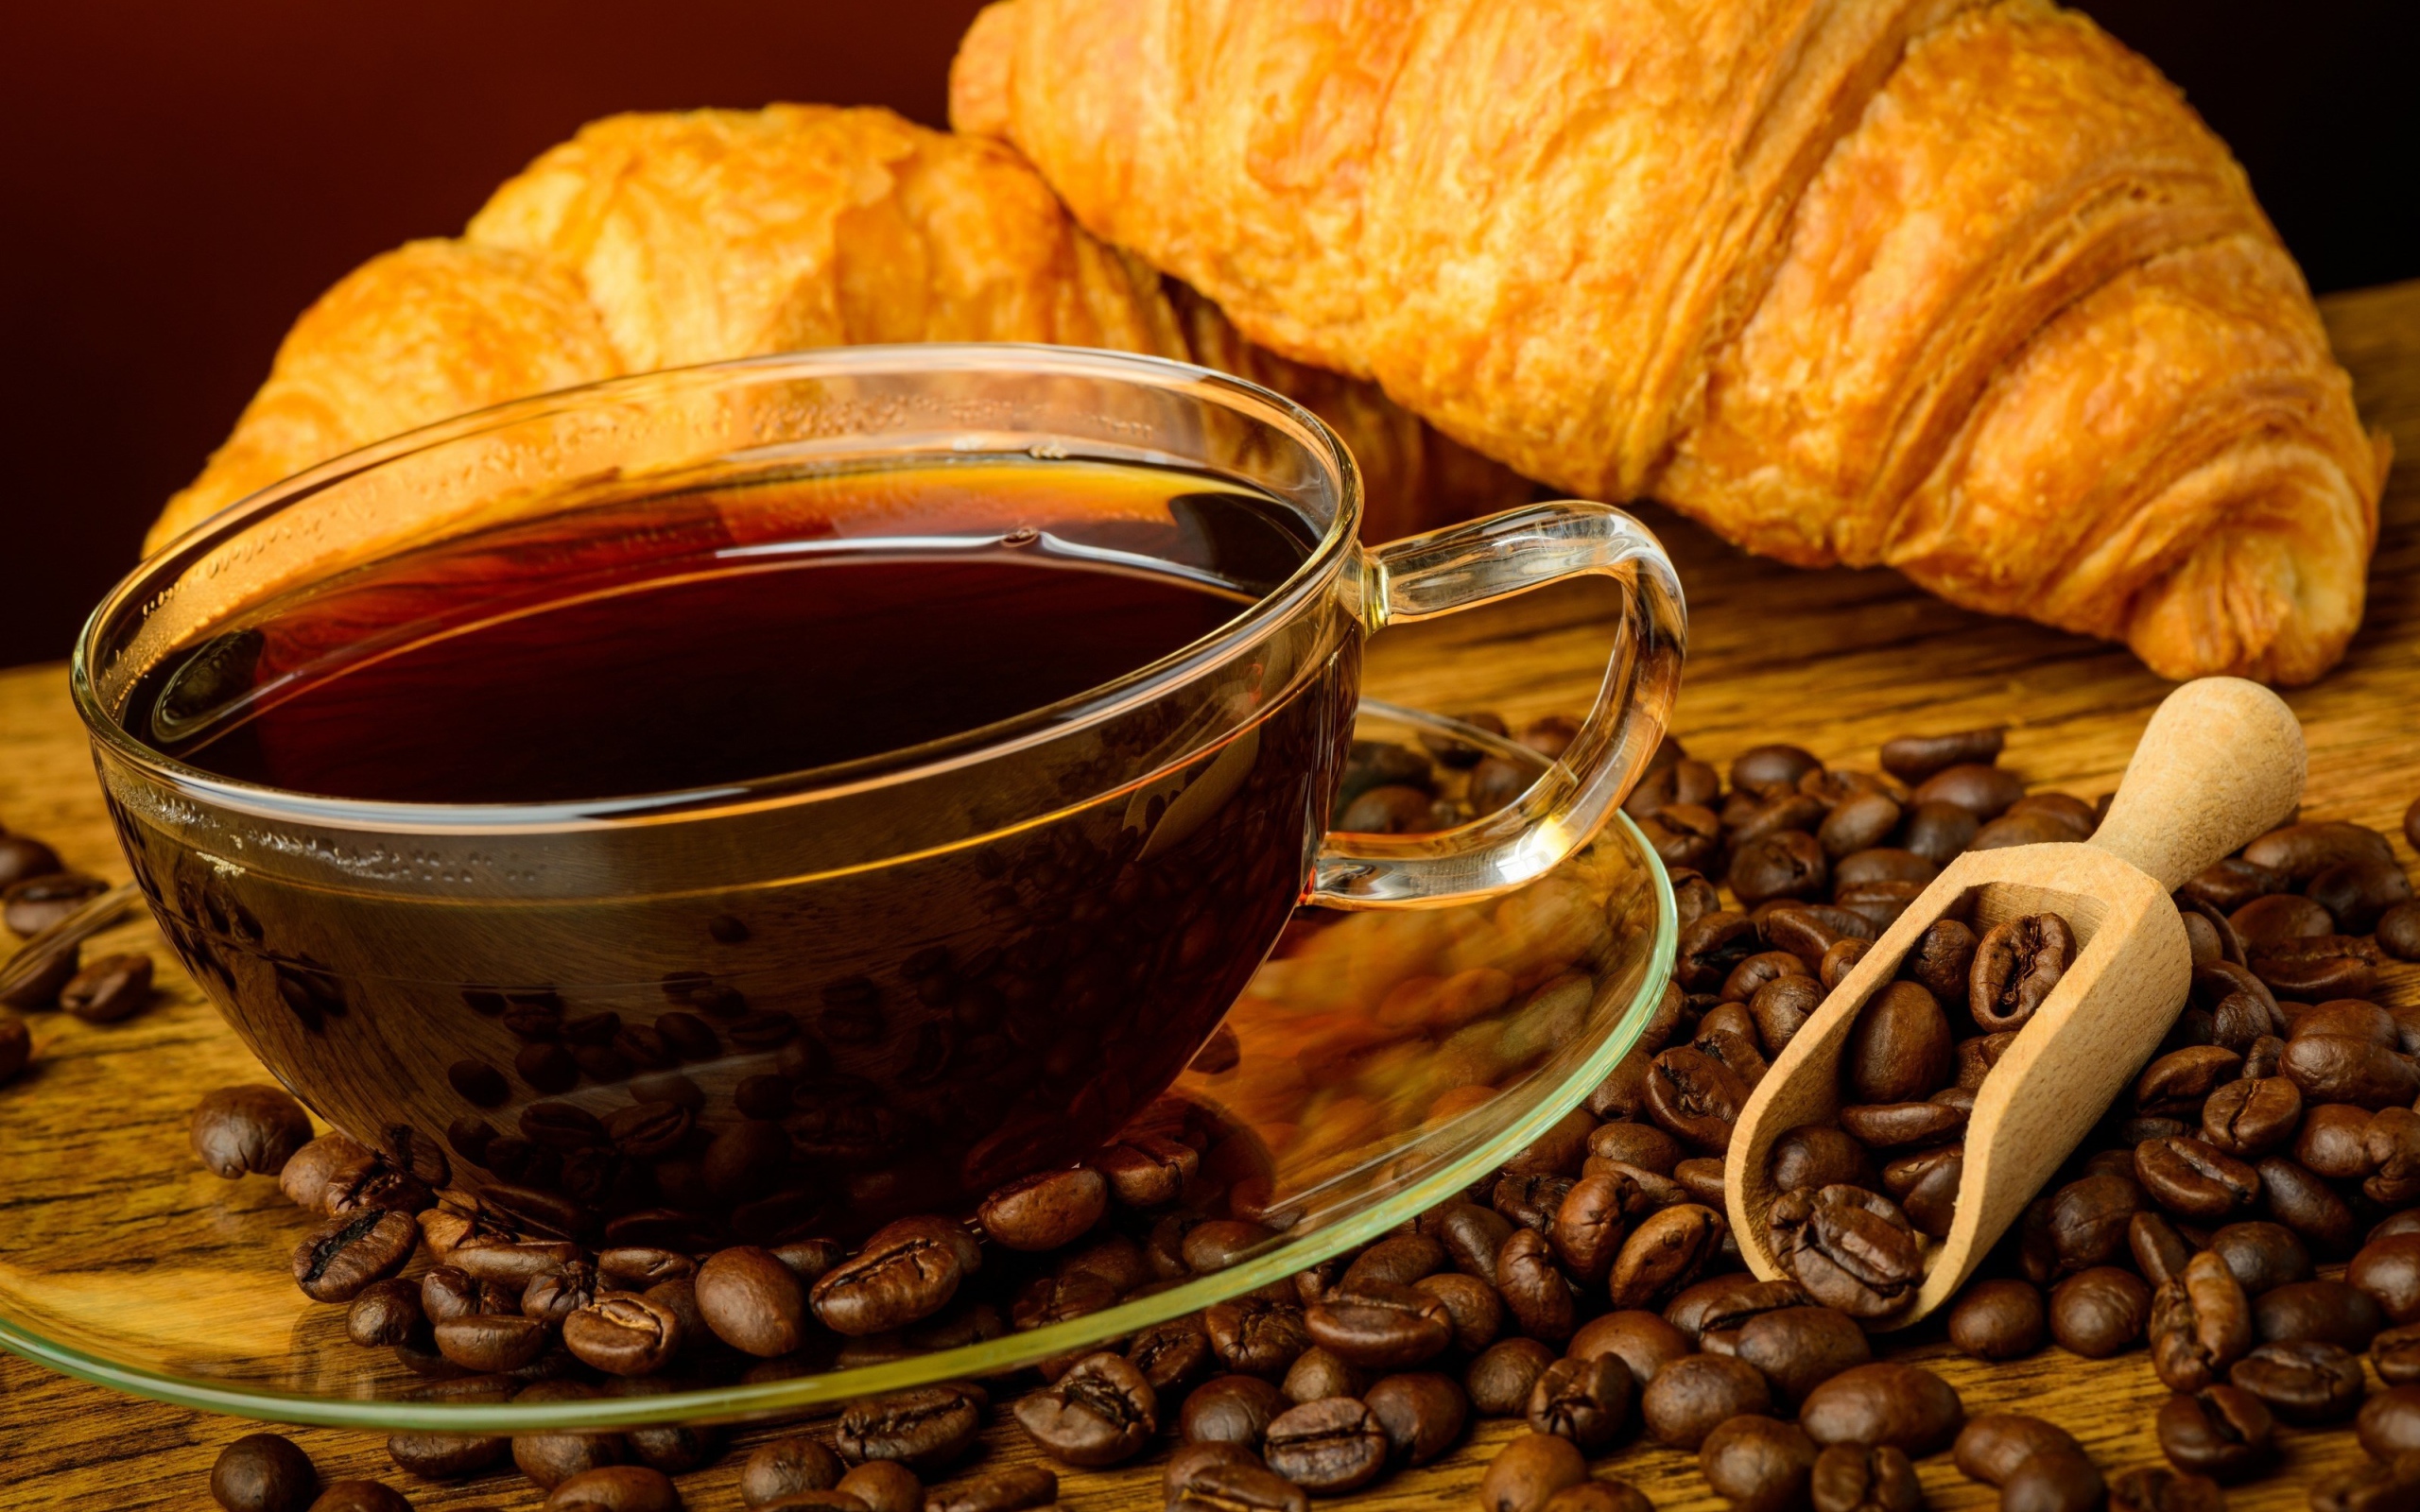 Glass cup of coffee with grains and fresh croissants on the table